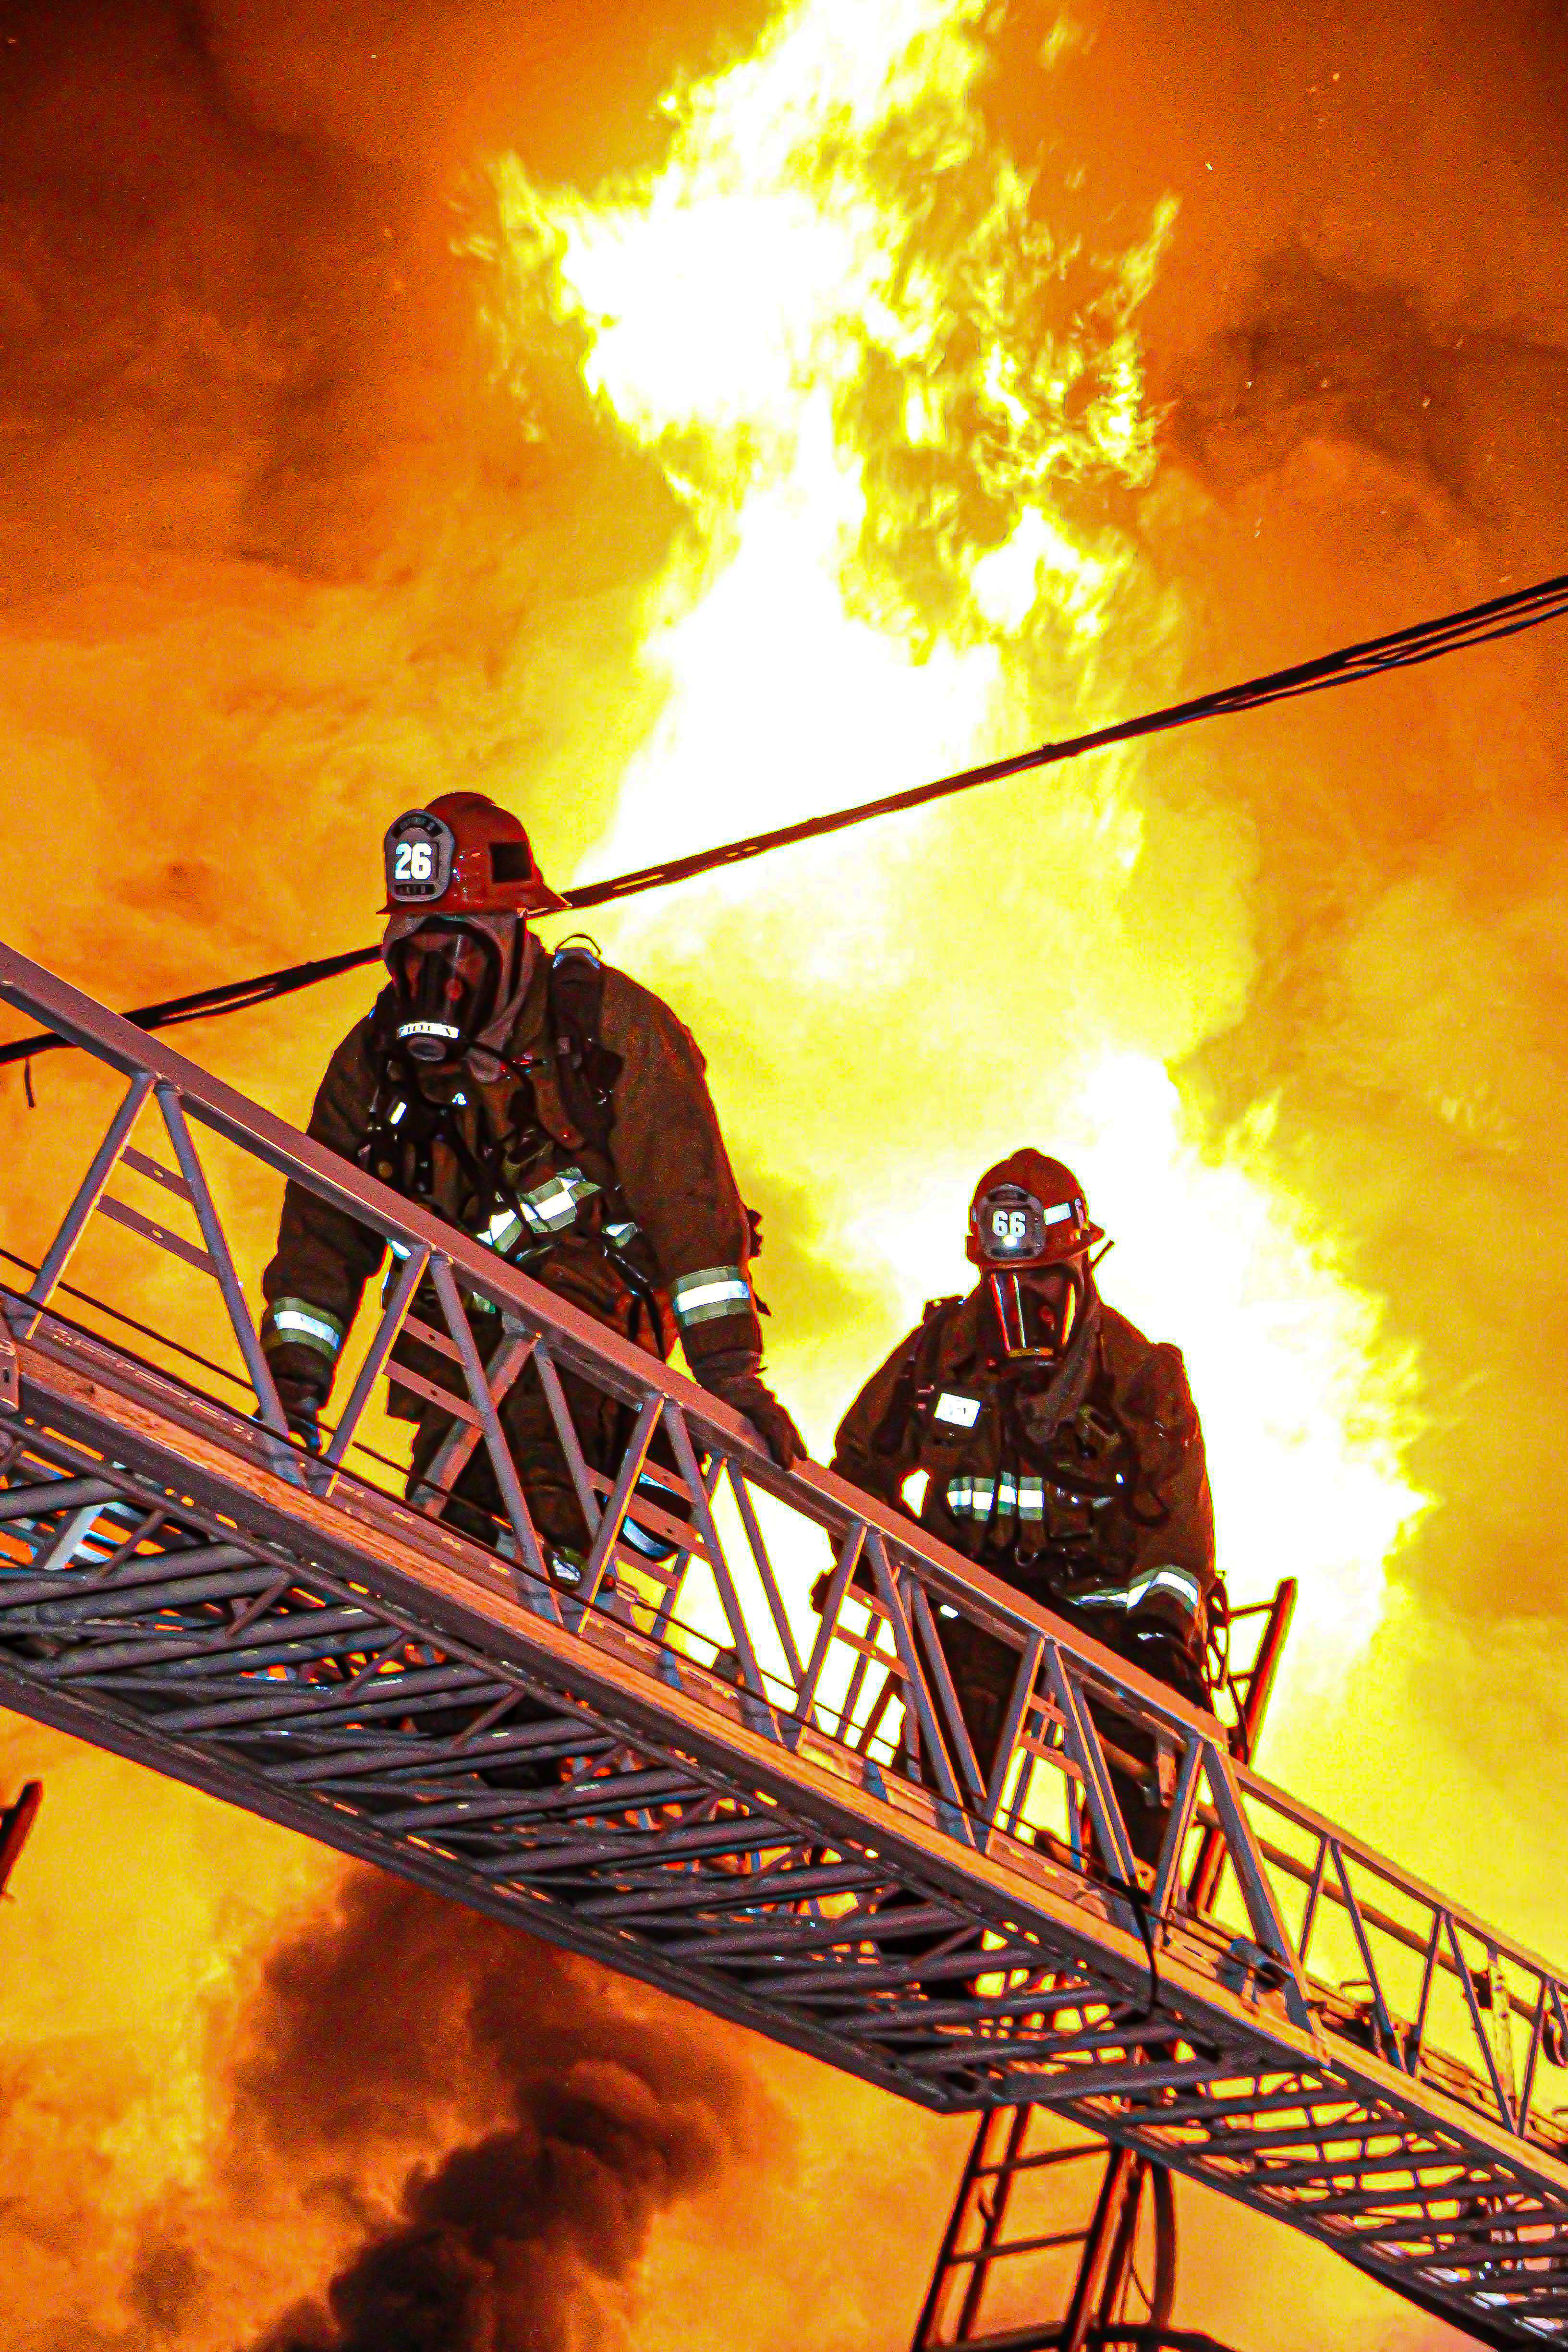 Two firefighters ascending aerial ladder with fire ranging in the back